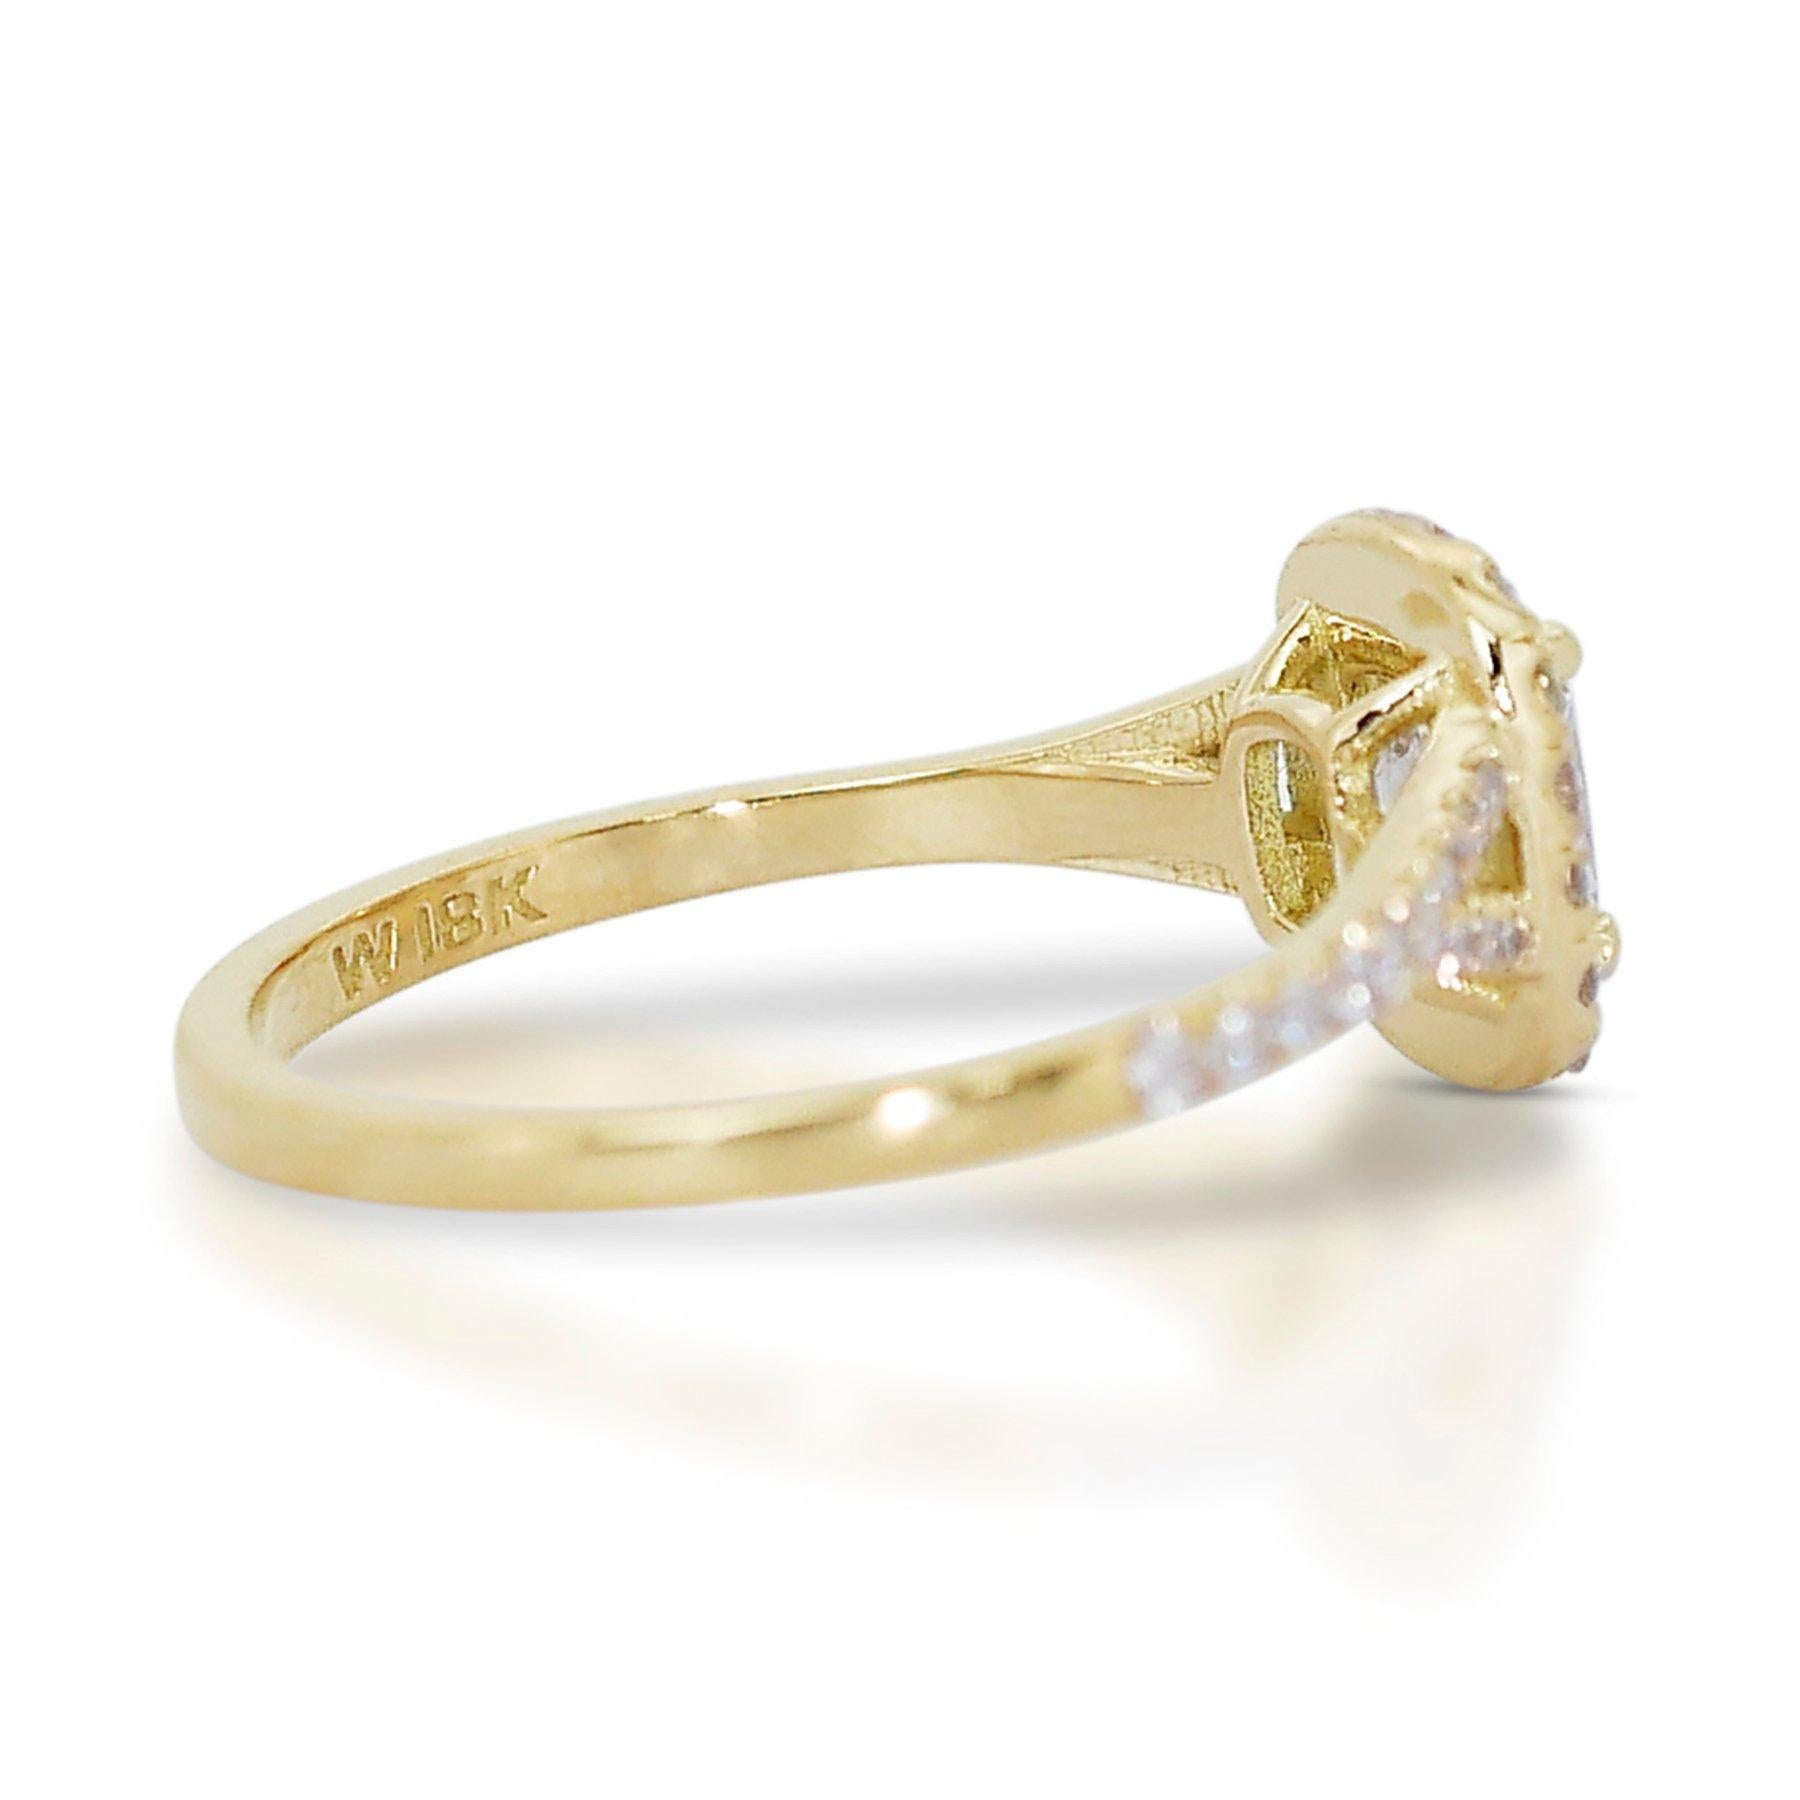 Brilliant 1.33ct Diamond Halo Ring in 18k Yellow Gold – GIA Certified In New Condition For Sale In רמת גן, IL